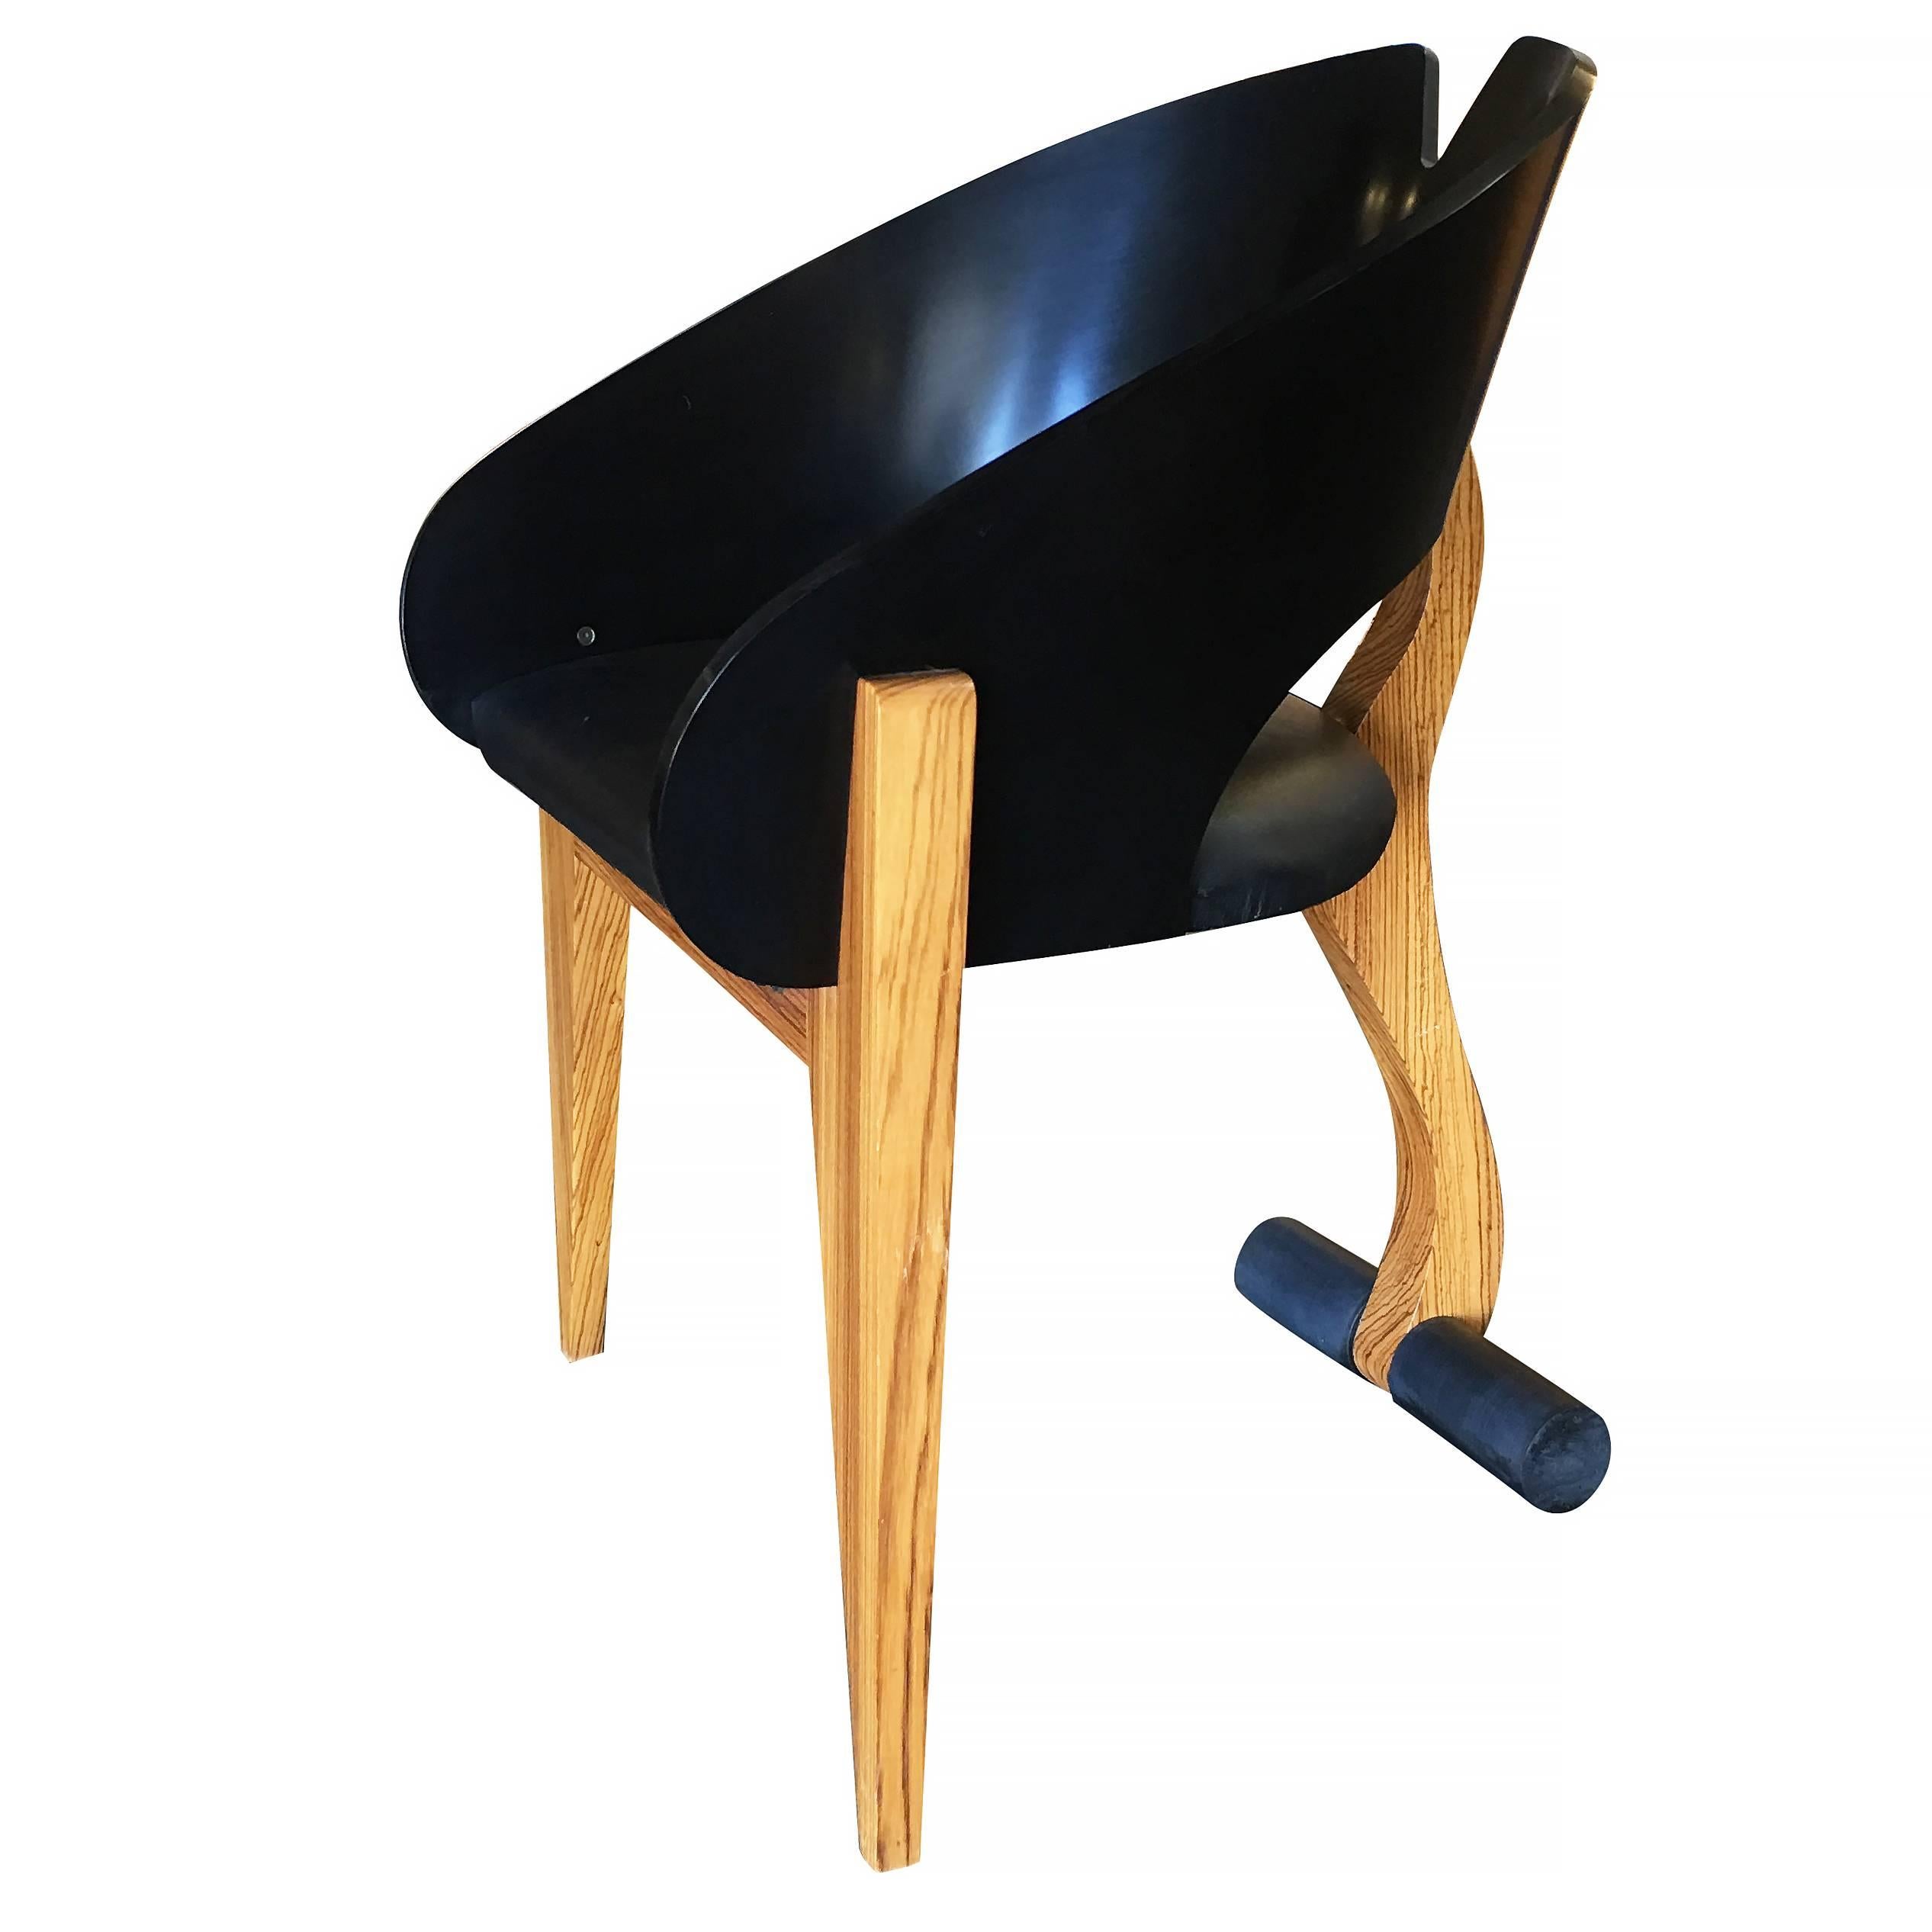 Late 20th Century Modernist Chair from the Gallery of Functional Art, circa 1994